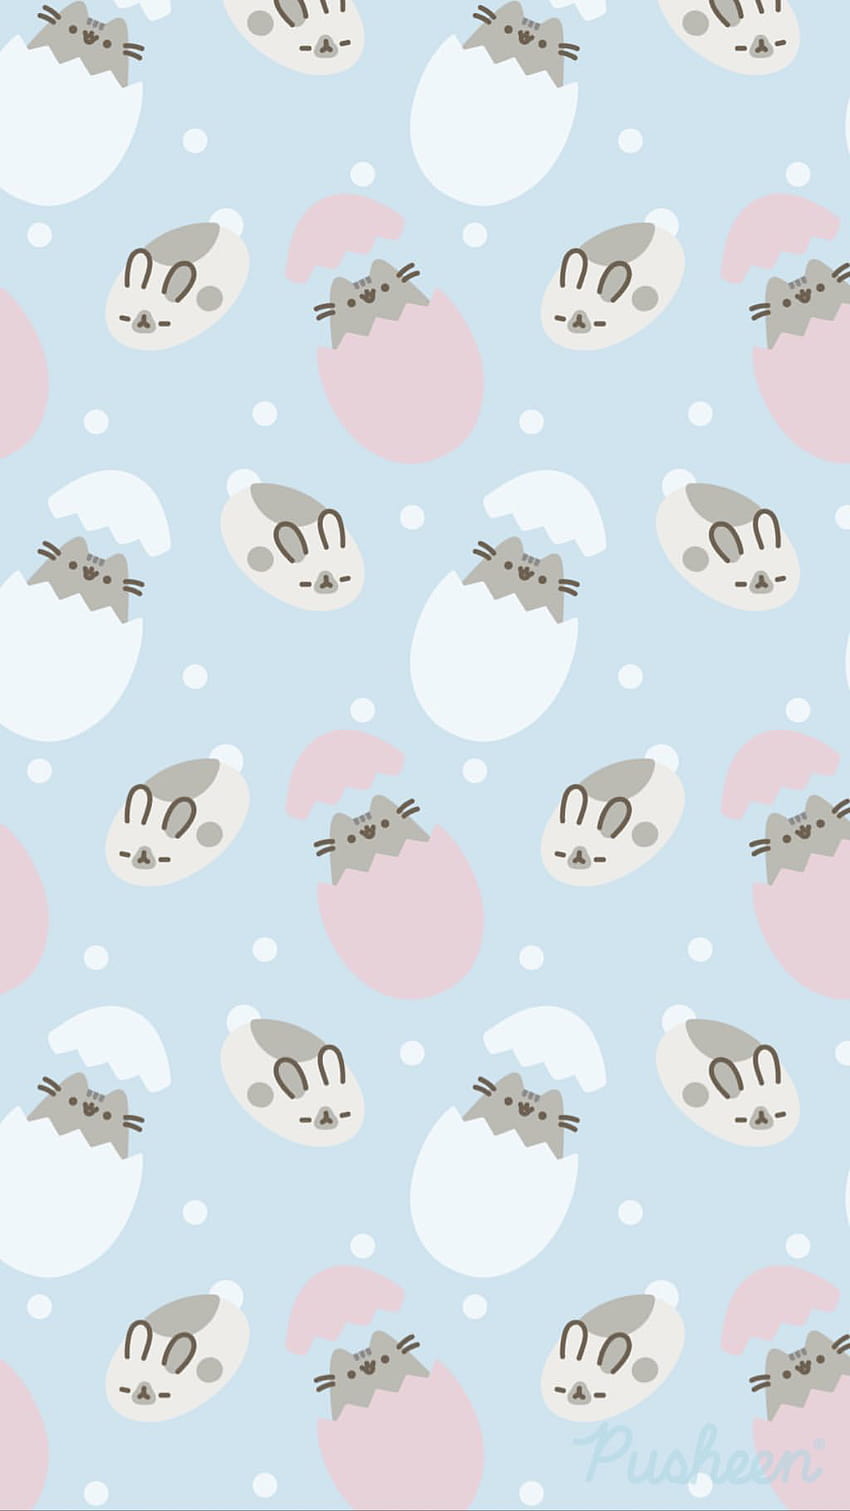 Pusheen the cat floral pastels spring iphone Easter, pusheen in spring HD phone wallpaper